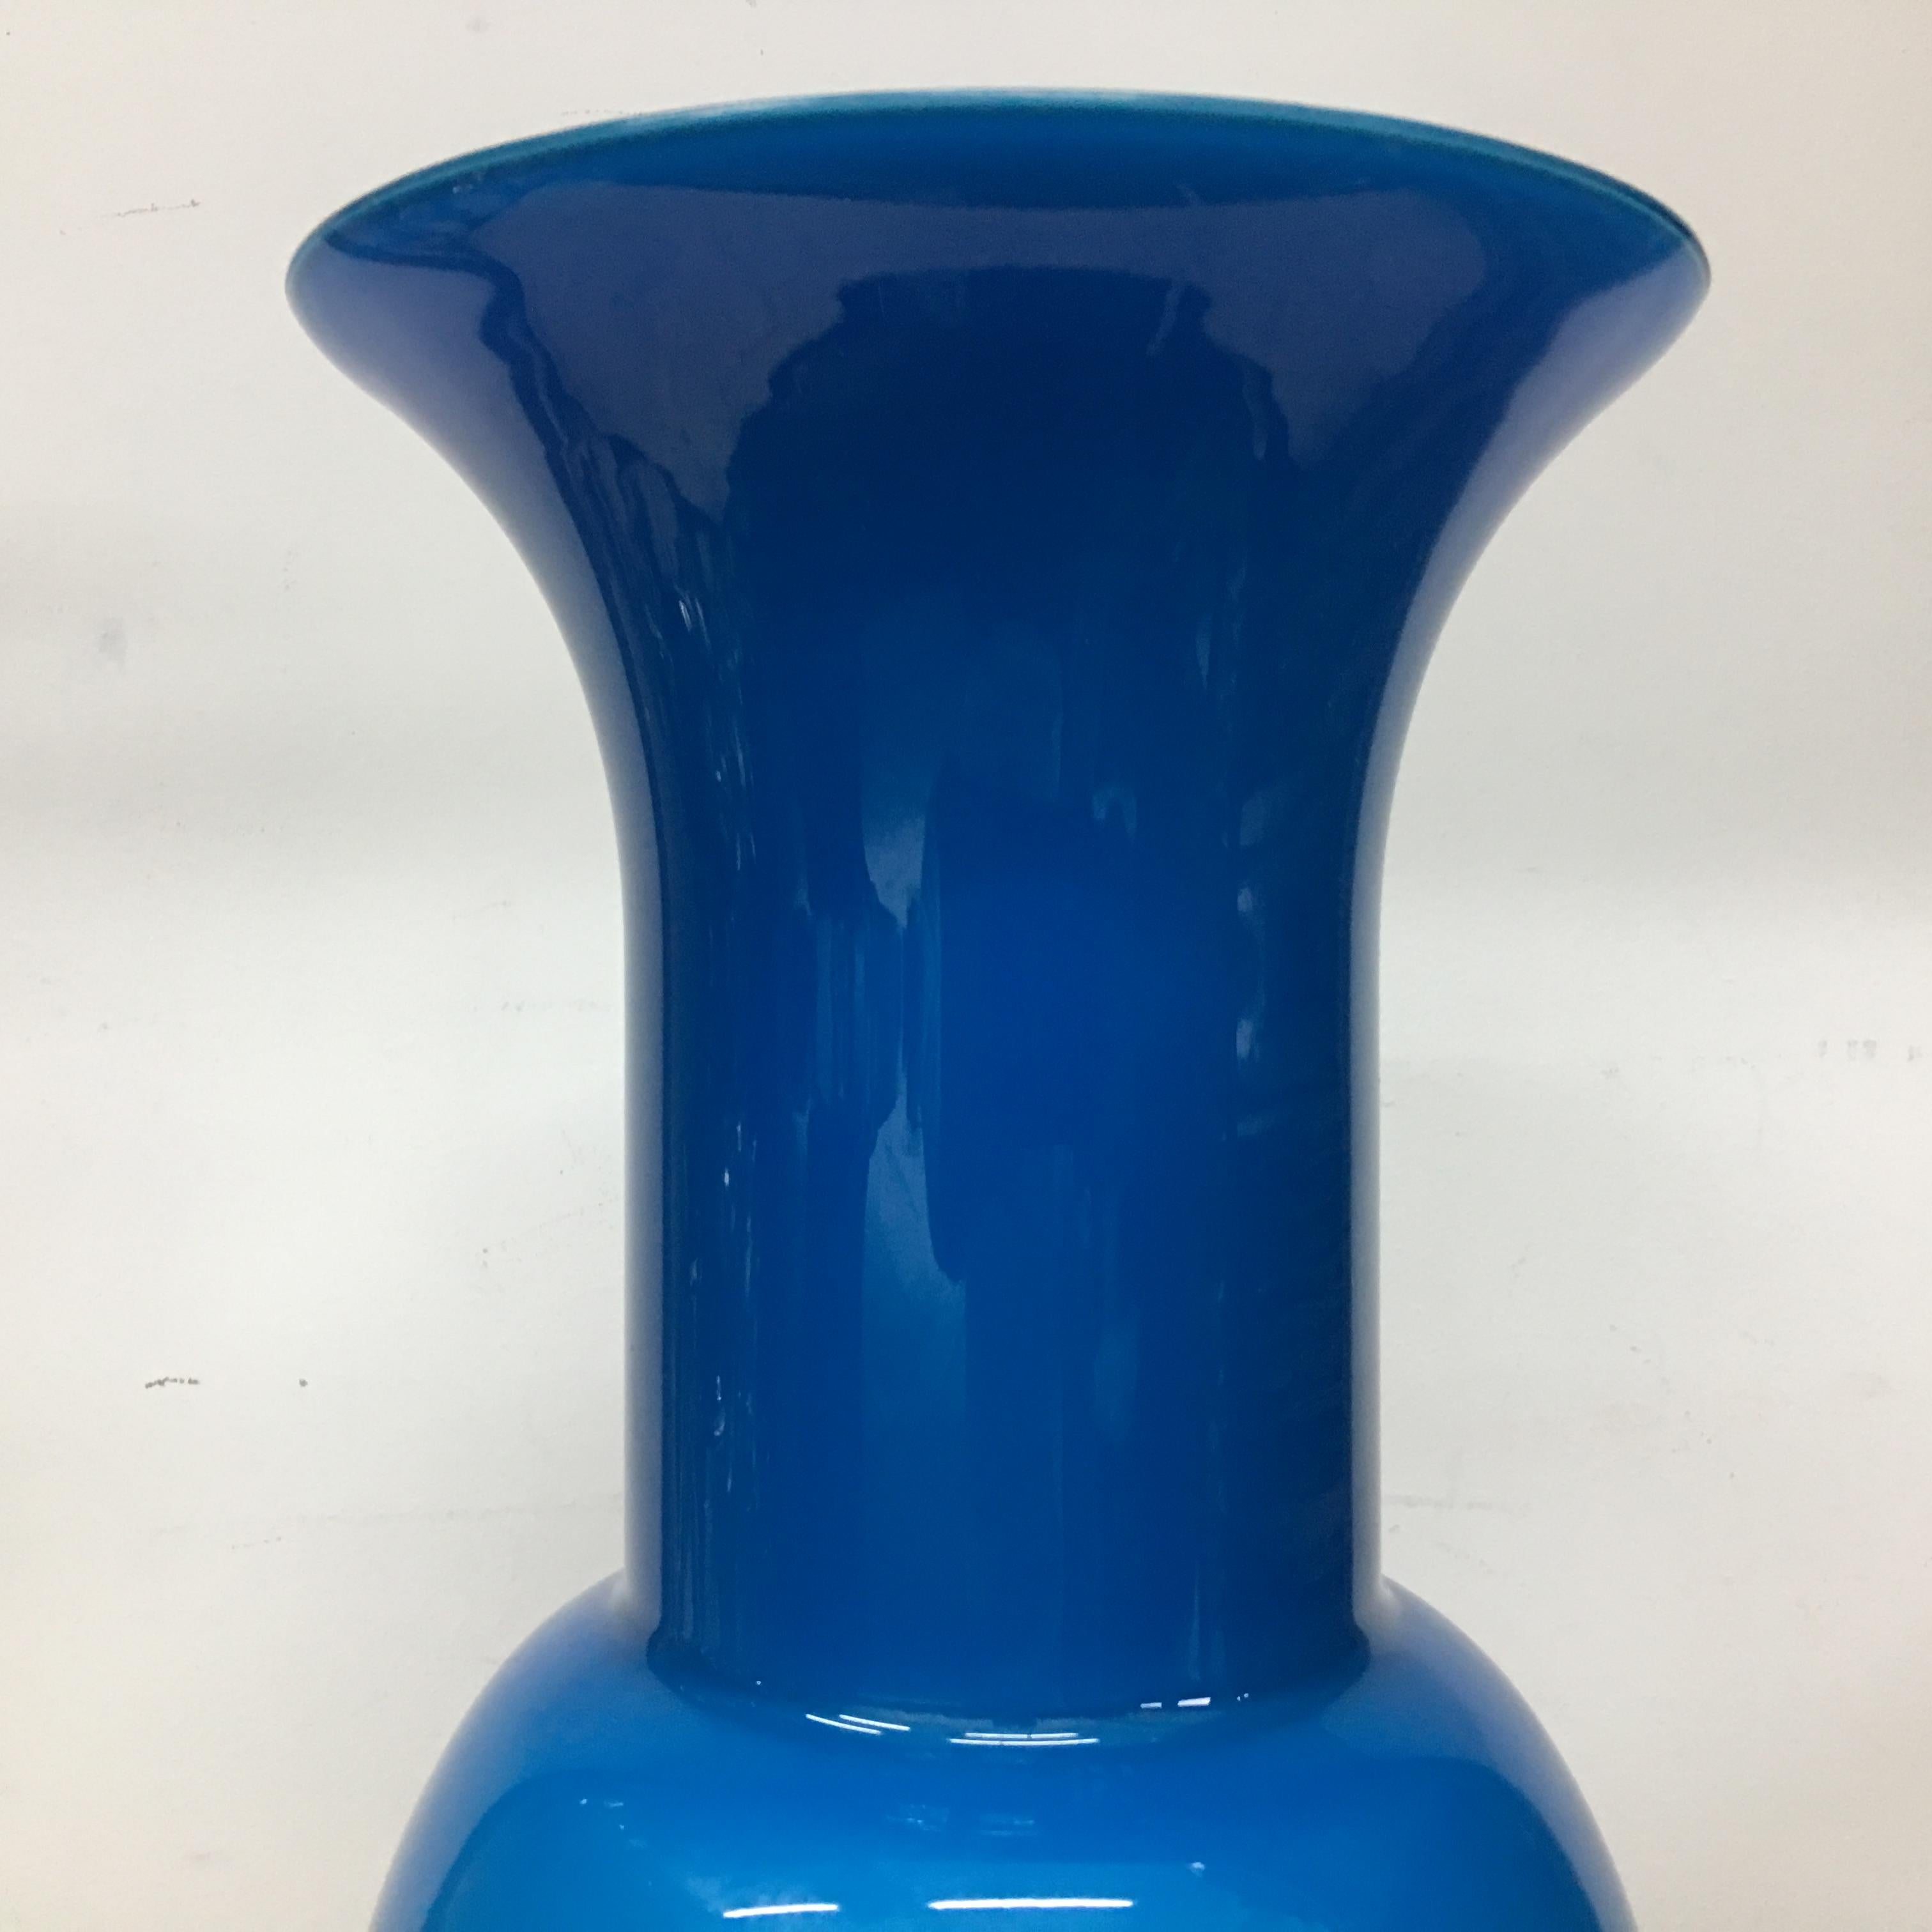 Murano glass vase made in Italy in 2000 by Aureliano Toso in perfect conditions. Signed and dated on the bottom.